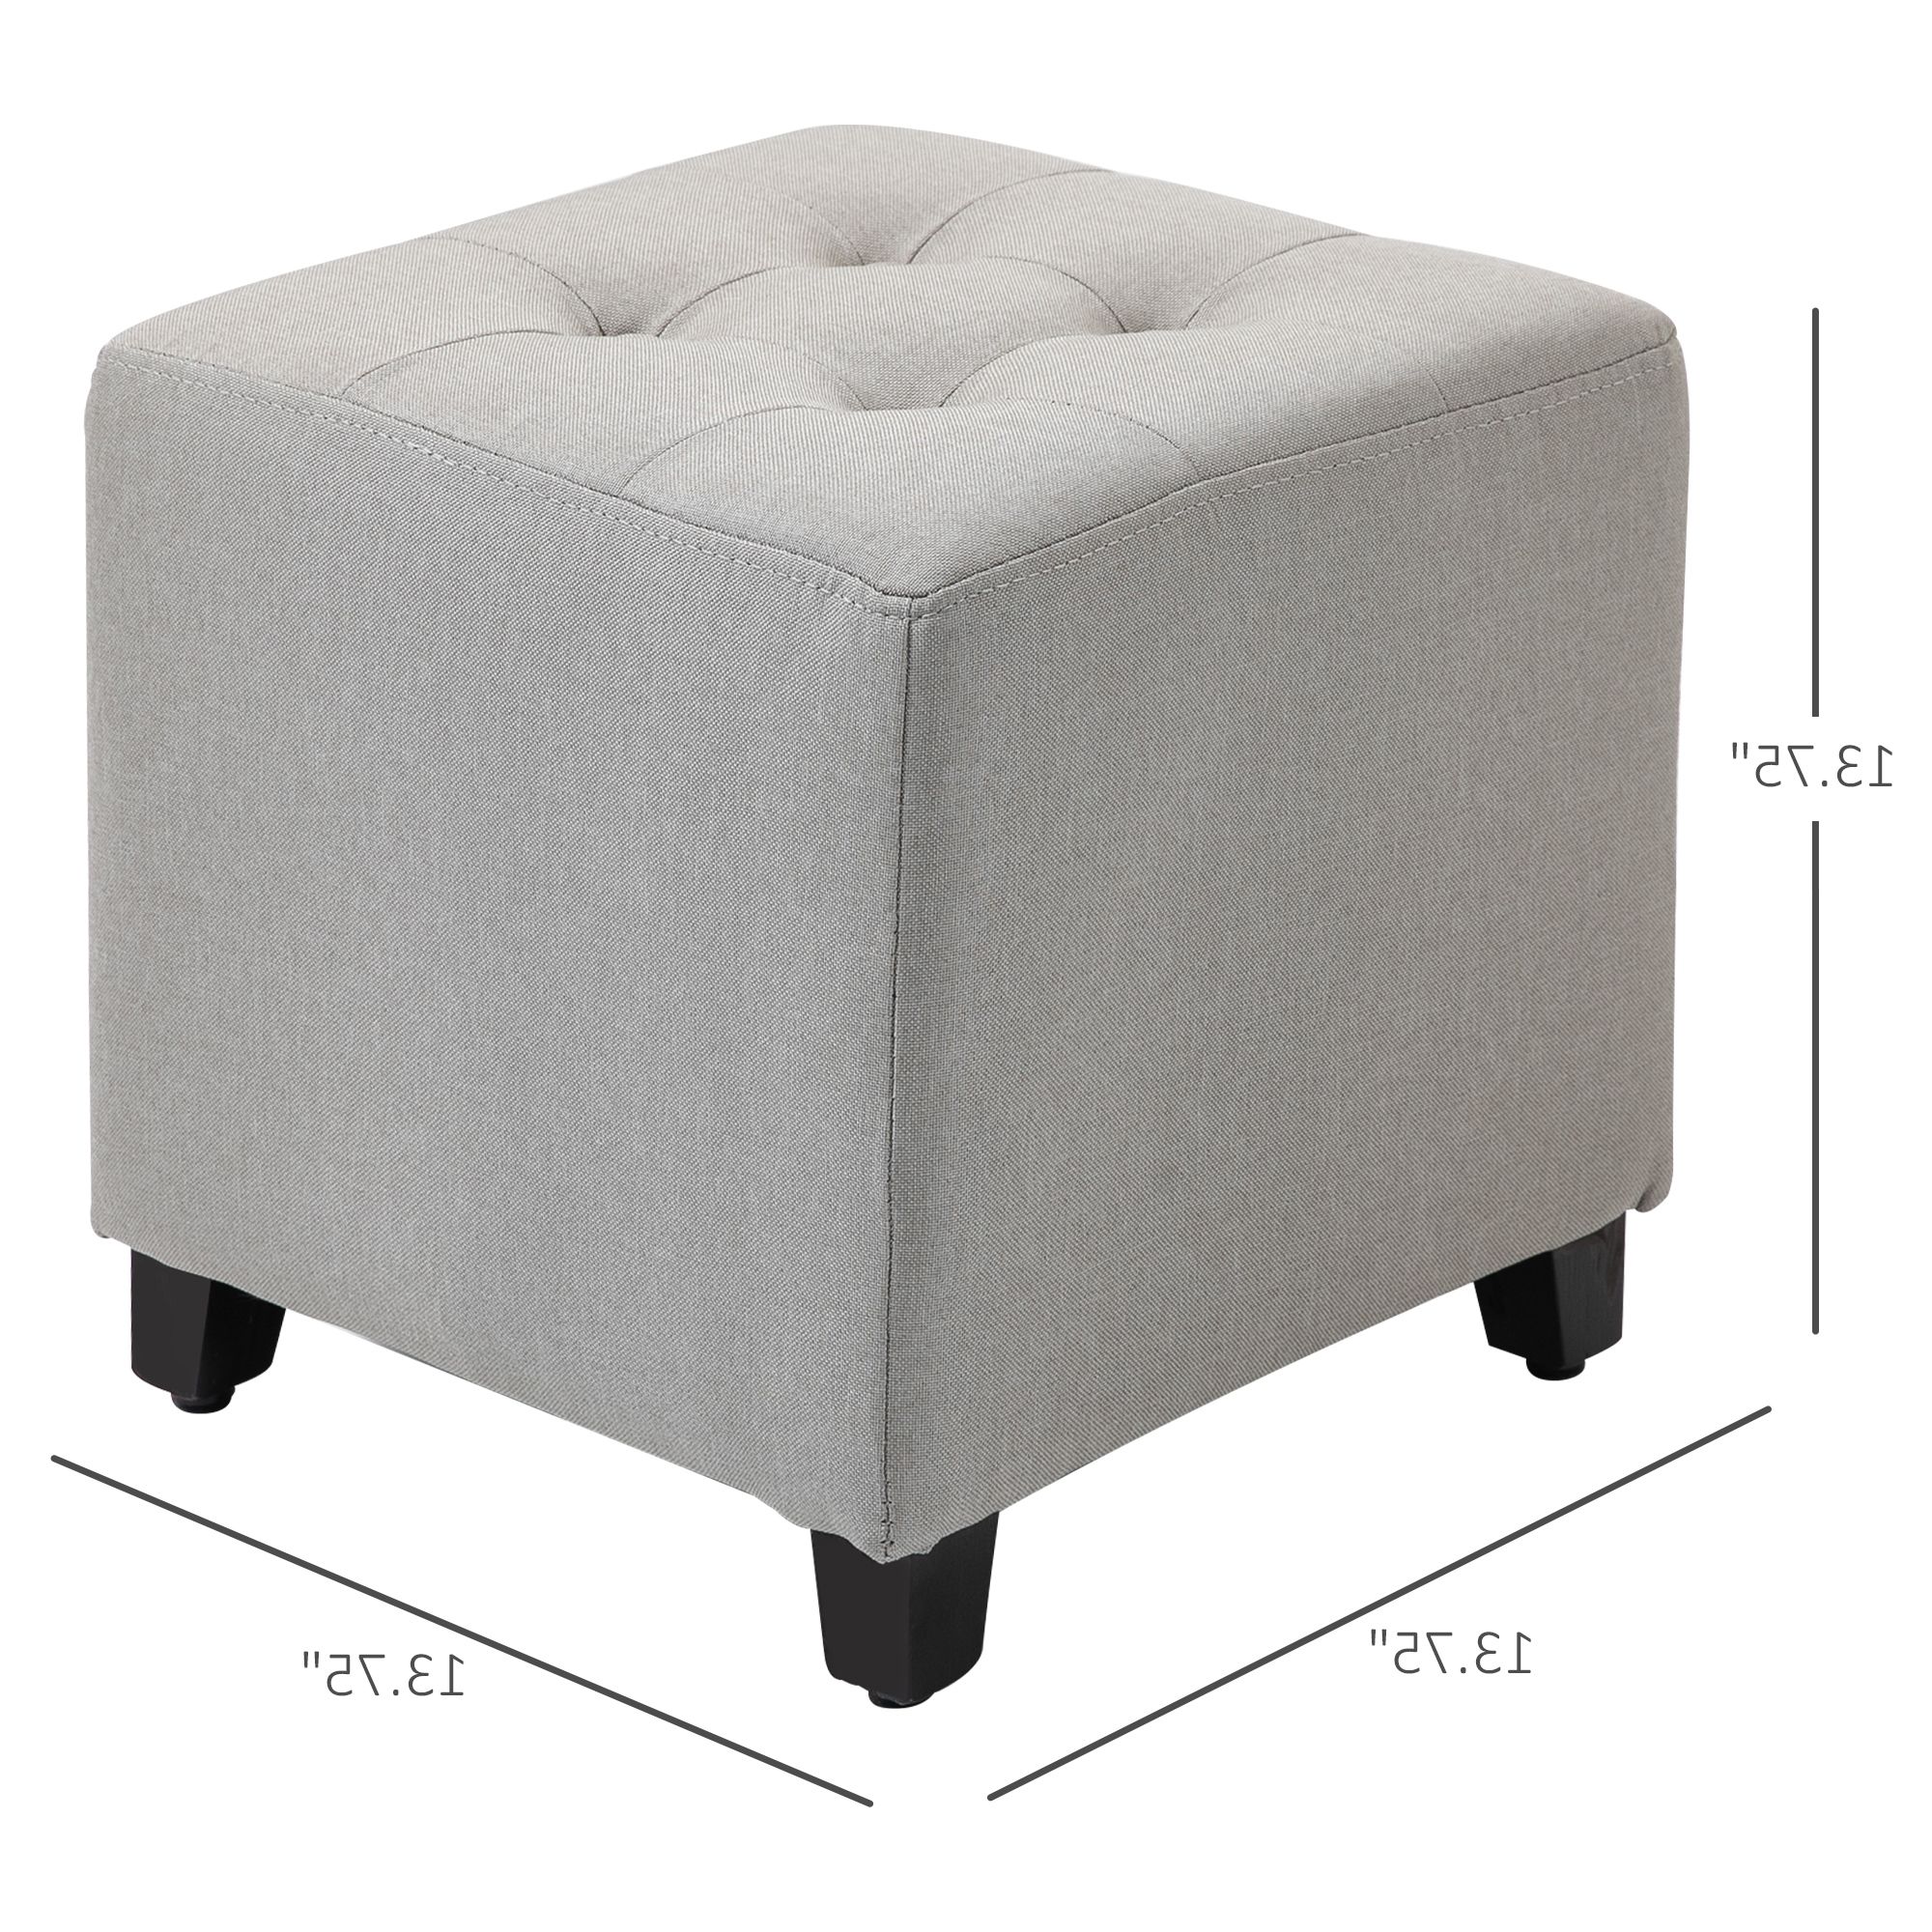 Tufted Ottoman Linen Touch Fabric Upholstered Footstool Footrest Coffee Throughout Current Linen Fabric Tufted Surfboard Ottomans (View 8 of 10)